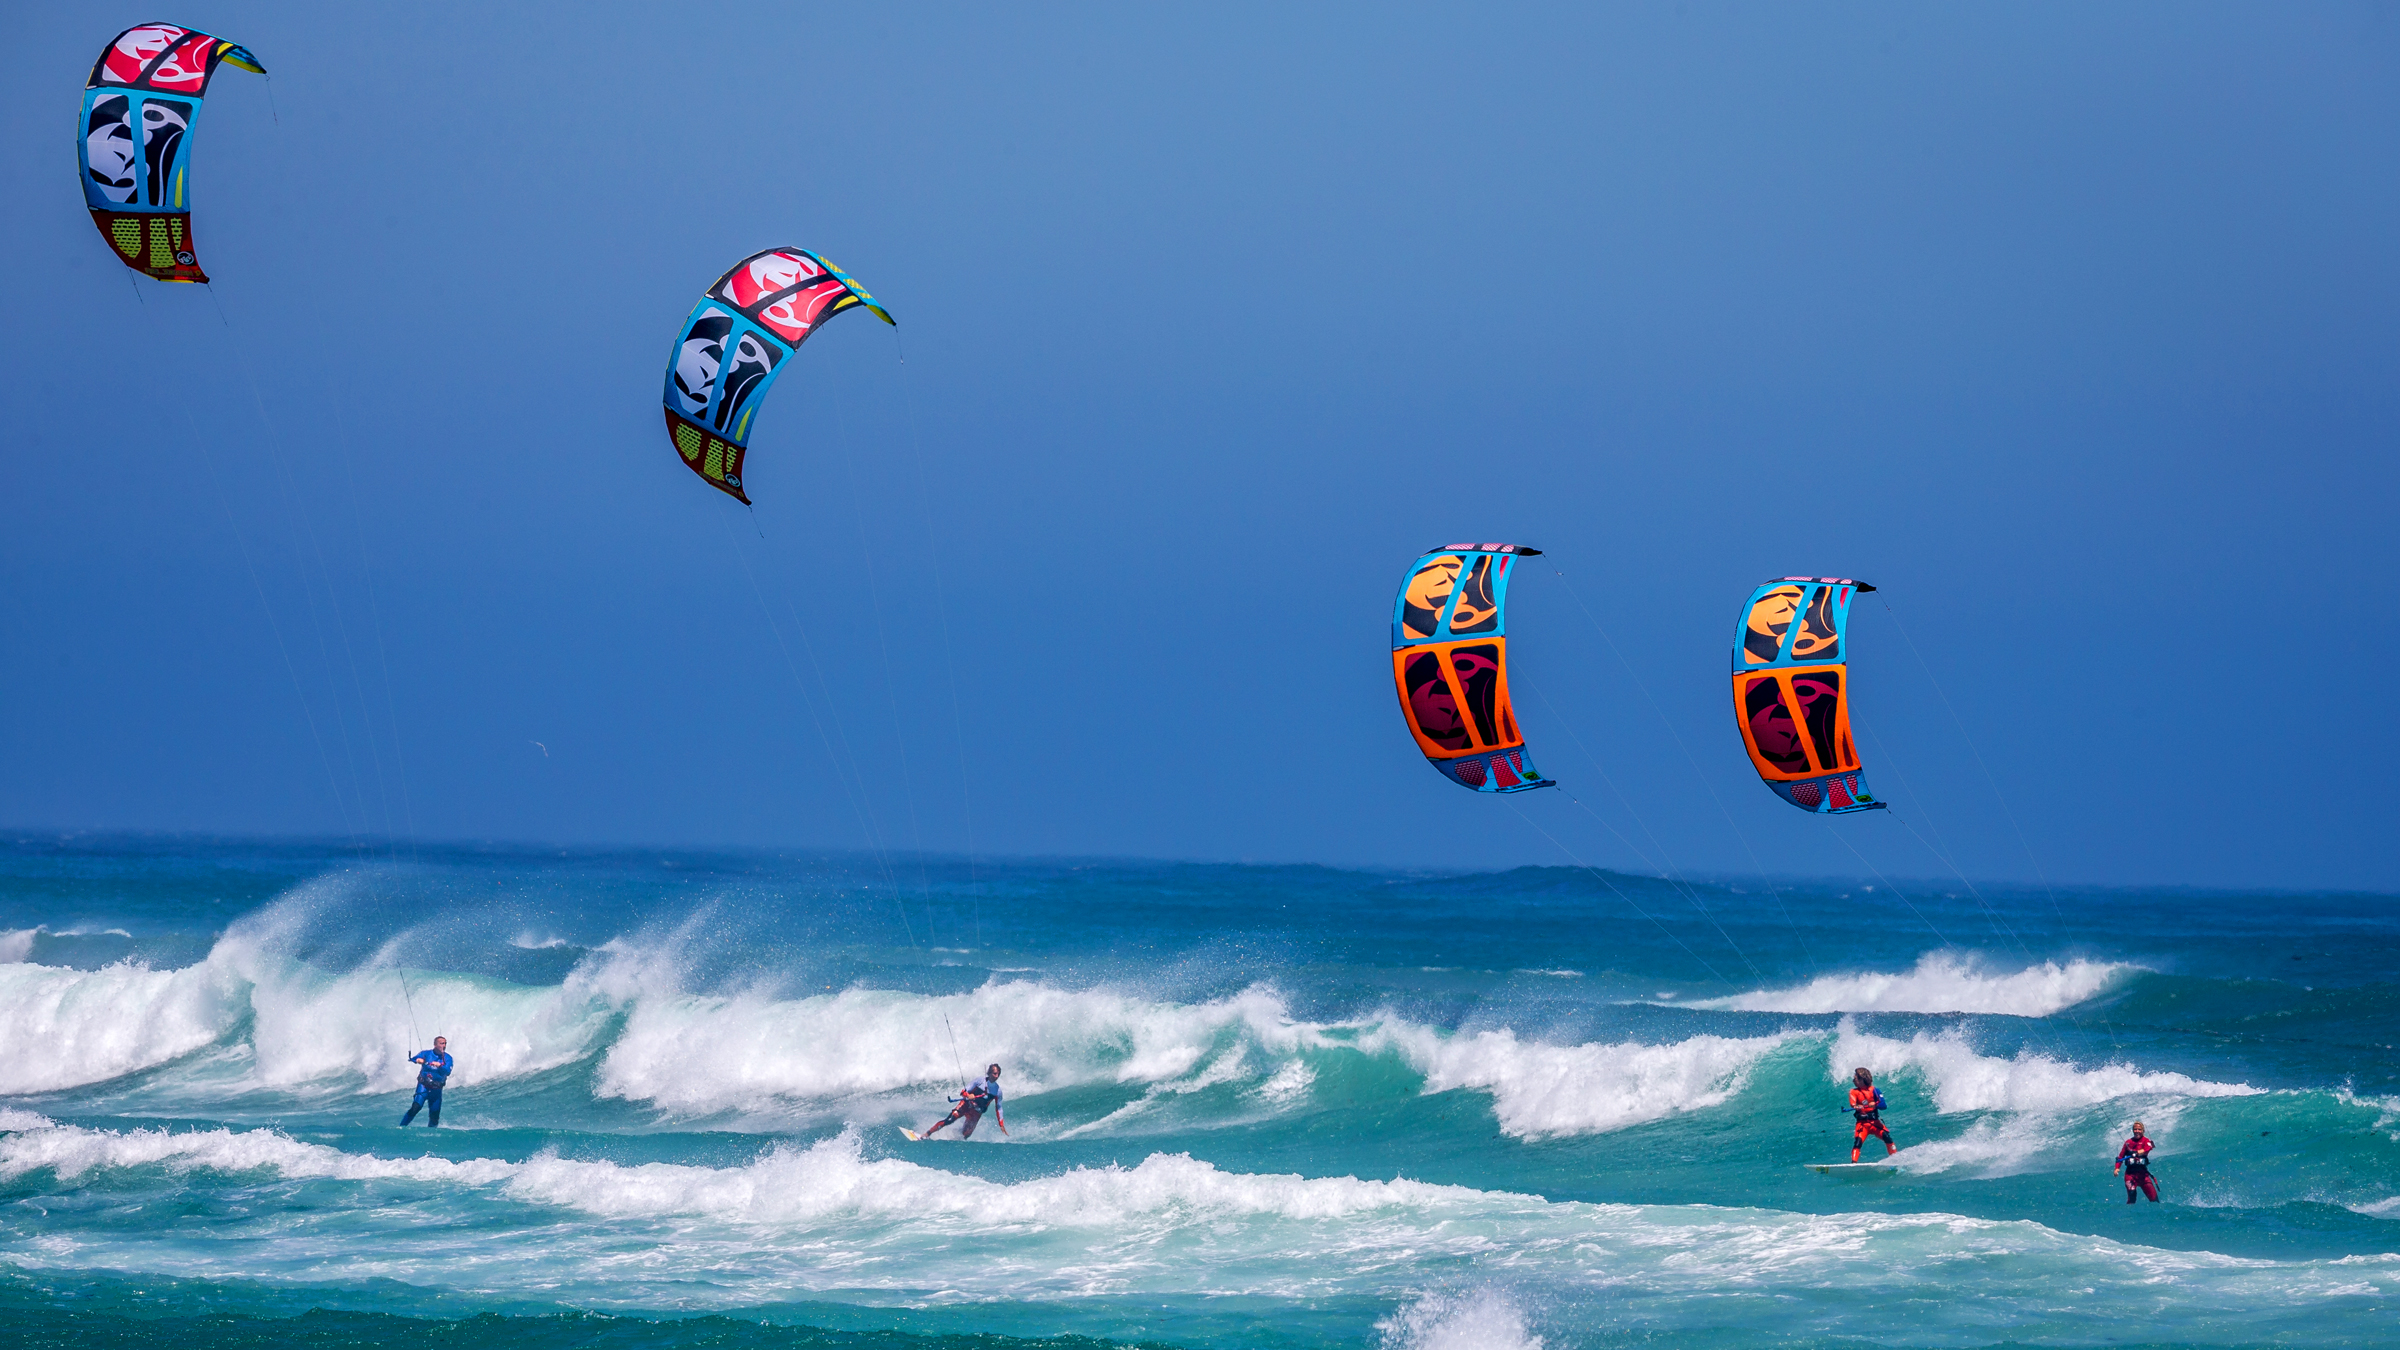 kitesurf wallpaper image - RRD squad taking over this wave on 2015 Religion kites - RRD Kiteboarding - in resolution: High Definition - HD 16:9 2400 X 1350